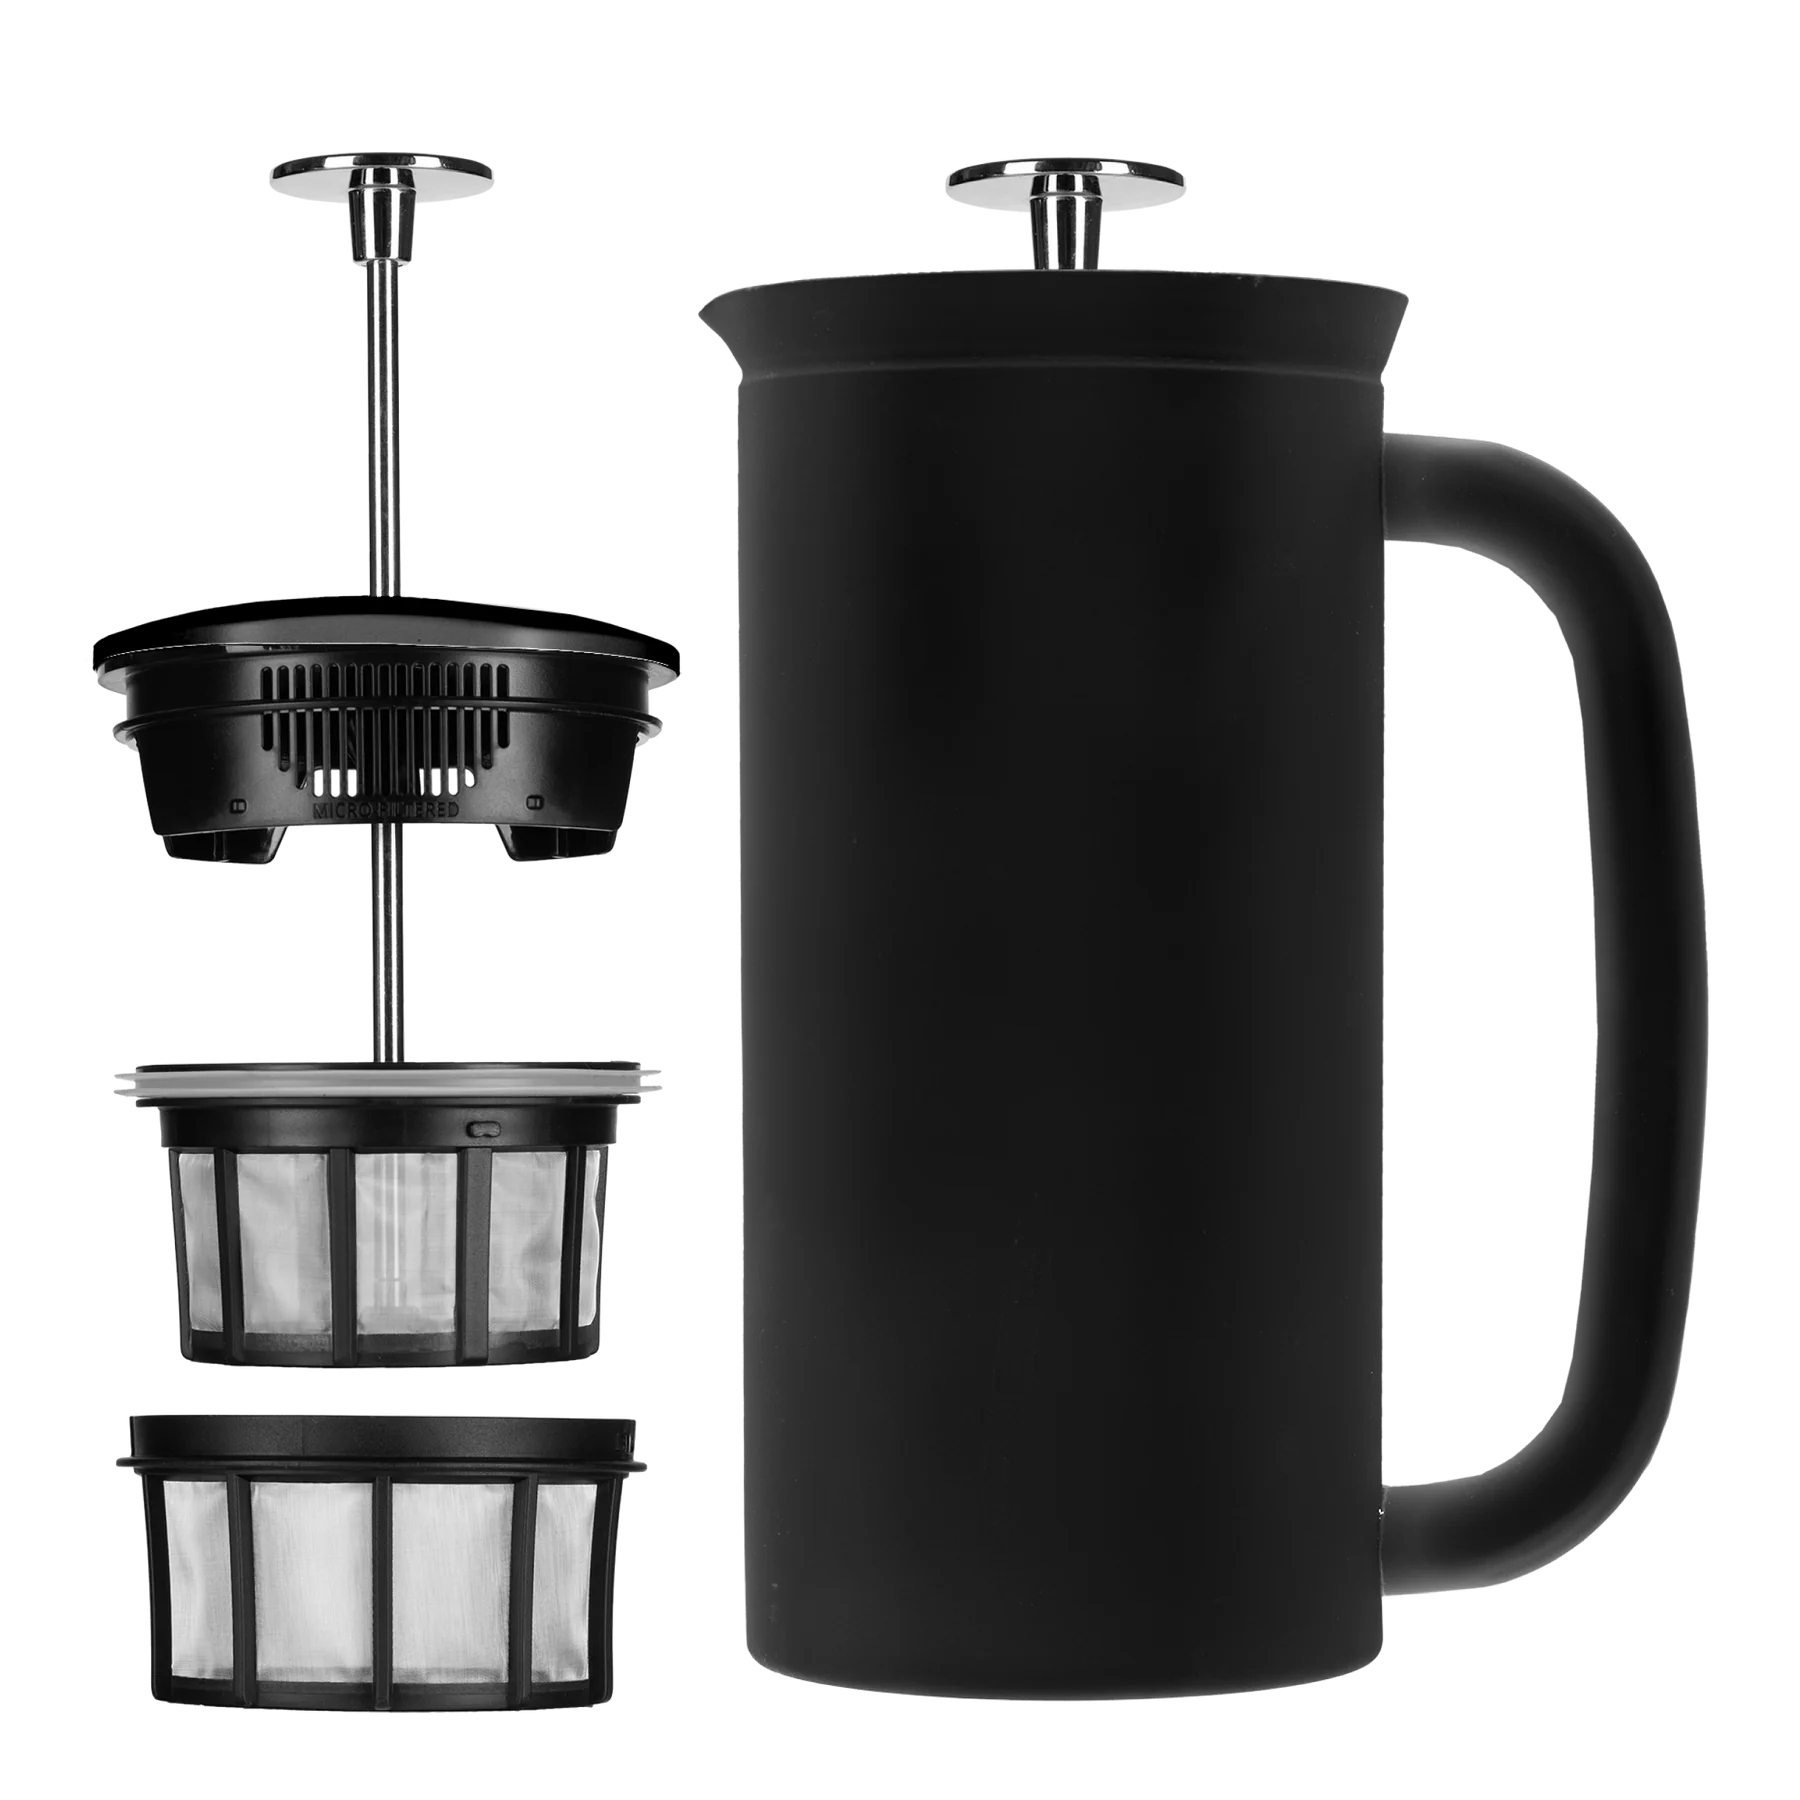 Espro P7 French Press, Stainless Steel, Double Wall, White, 32 oz.